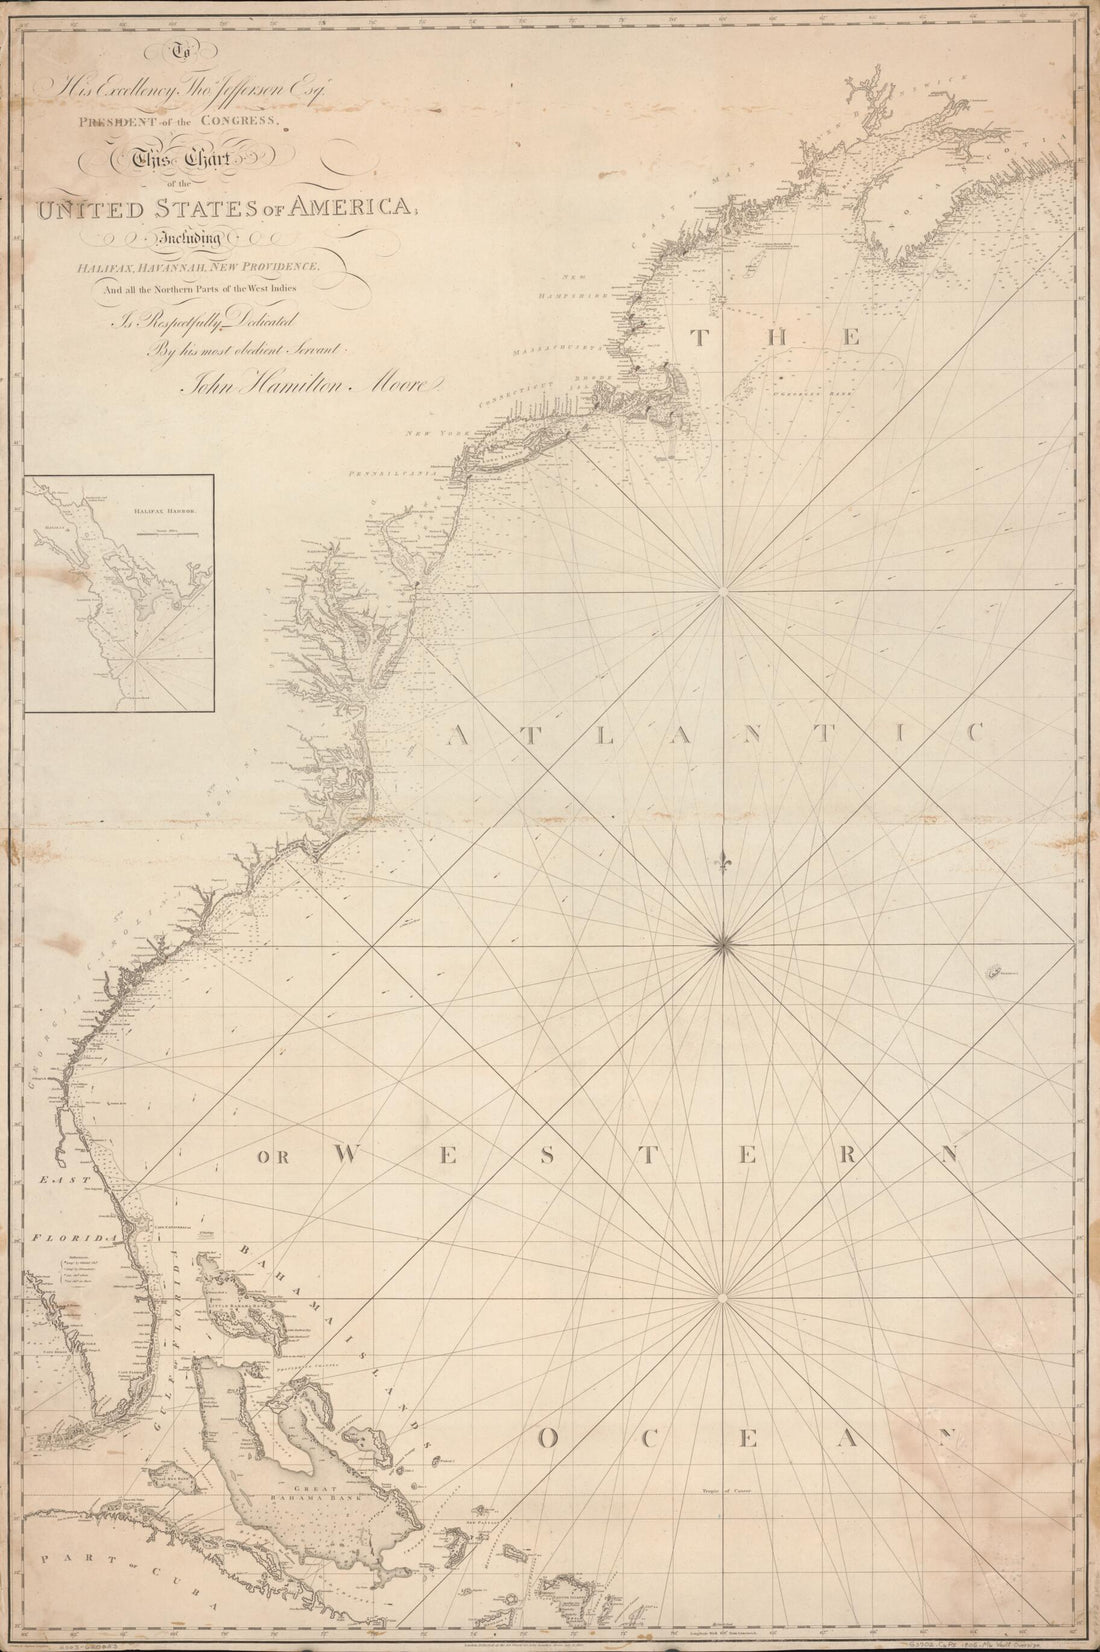 This old map of To His Excellency Thos. Jefferson, Esqr., President of the Congress, This Chart of the United States of America : Including Halifax, Havannah Havana, New Providence, and All the Northern Parts of the West Indies from 1805 was created by J